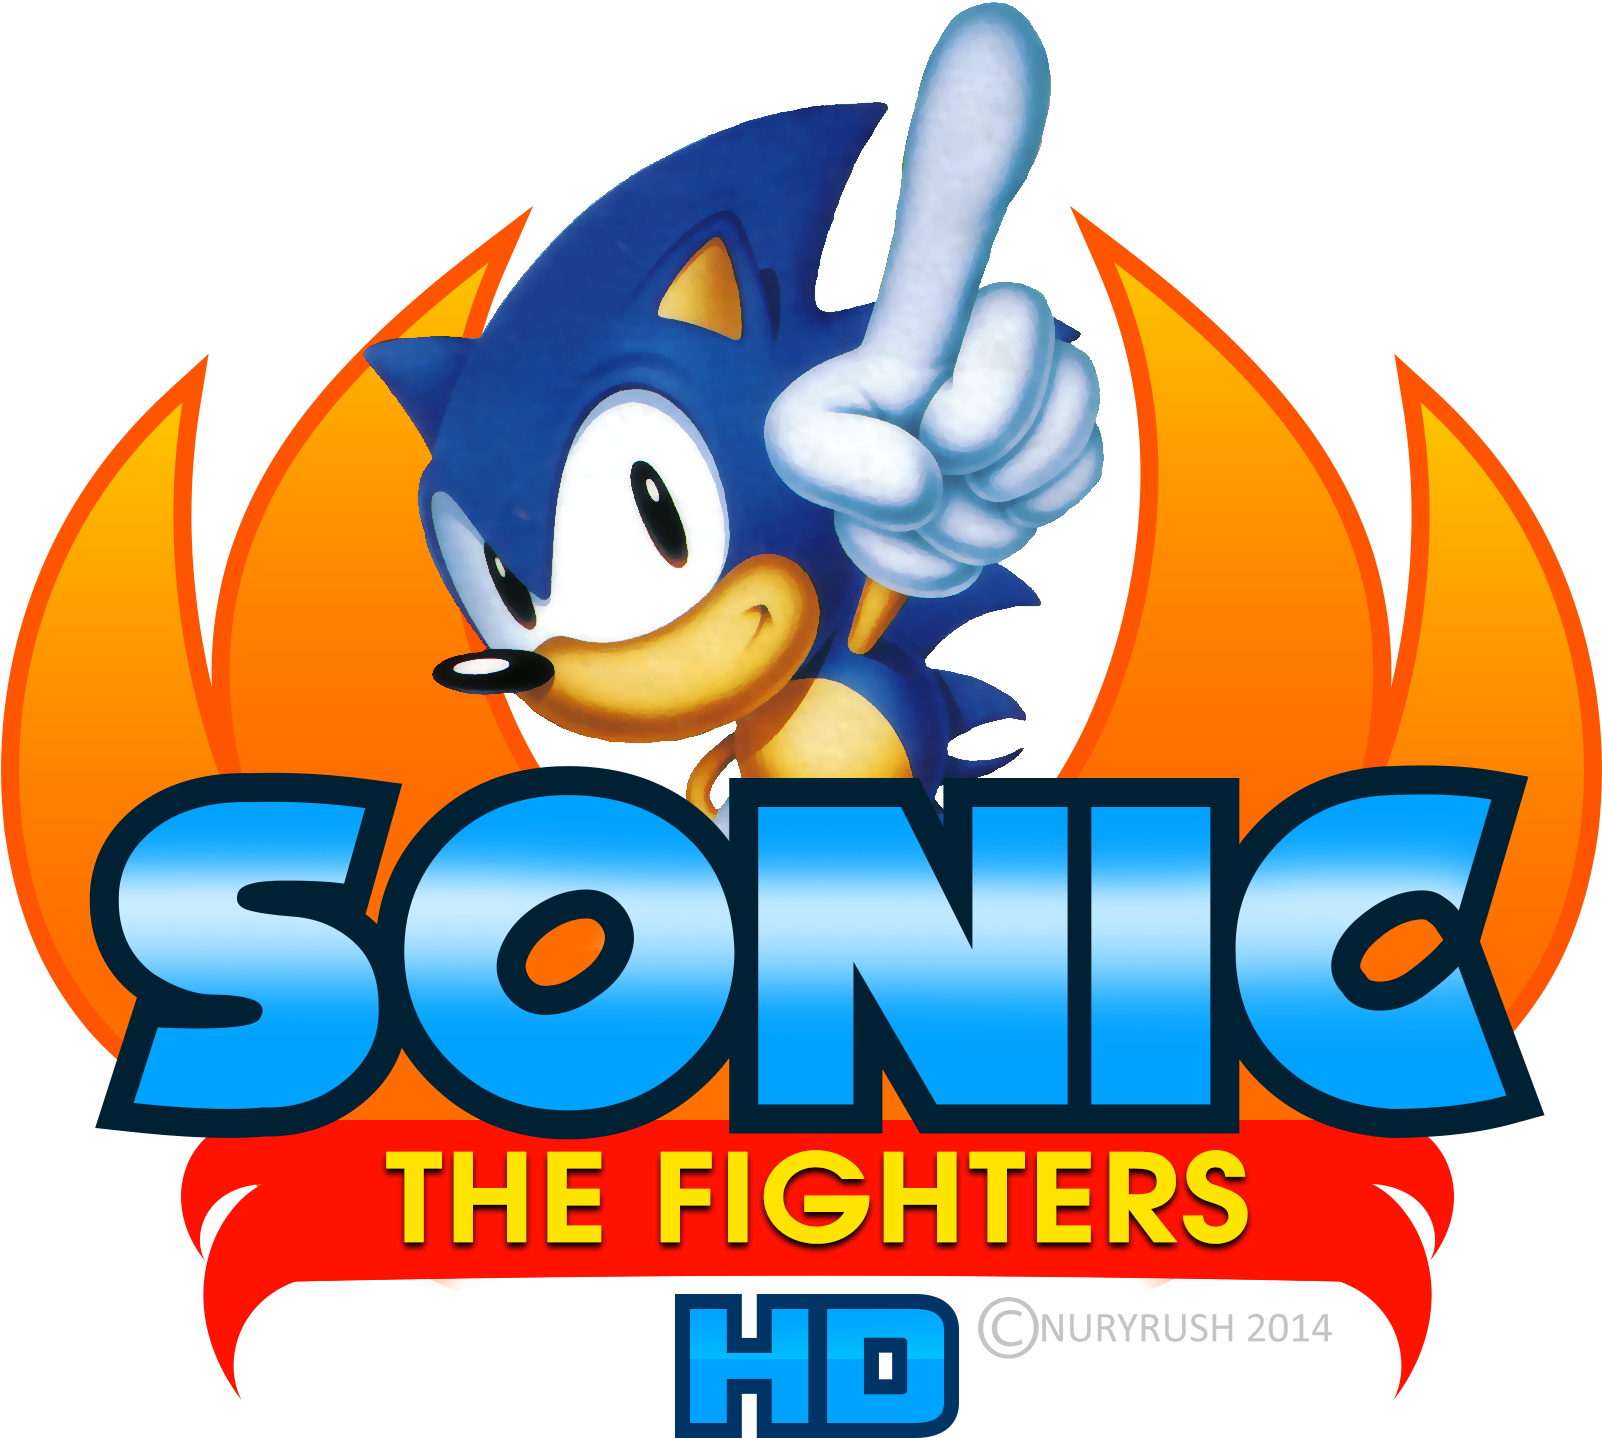 Sonic The Fighters Hd Logo Remade By Nuryrush - Sonic & Tails 2 (1762x1657)